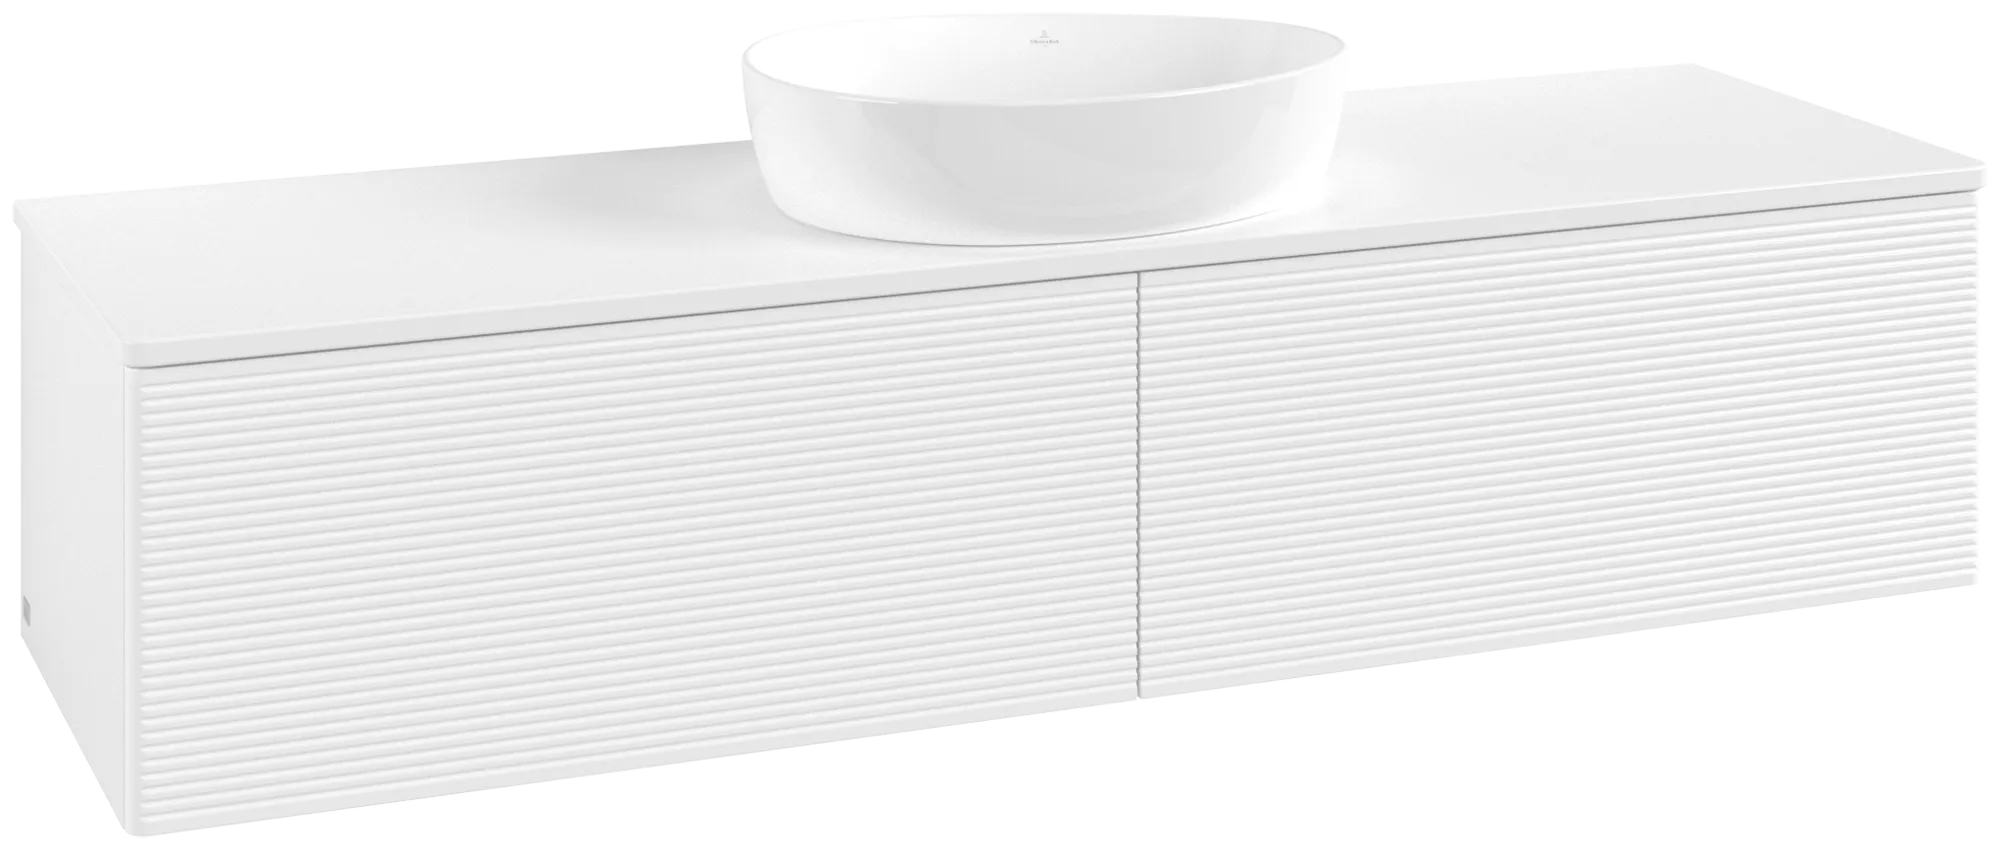 Obrázek VILLEROY BOCH Antao Vanity unit, 2 pull-out compartments, 1600 x 360 x 500 mm, Front with grain texture, White Matt Lacquer / White Matt Lacquer #K36150MT